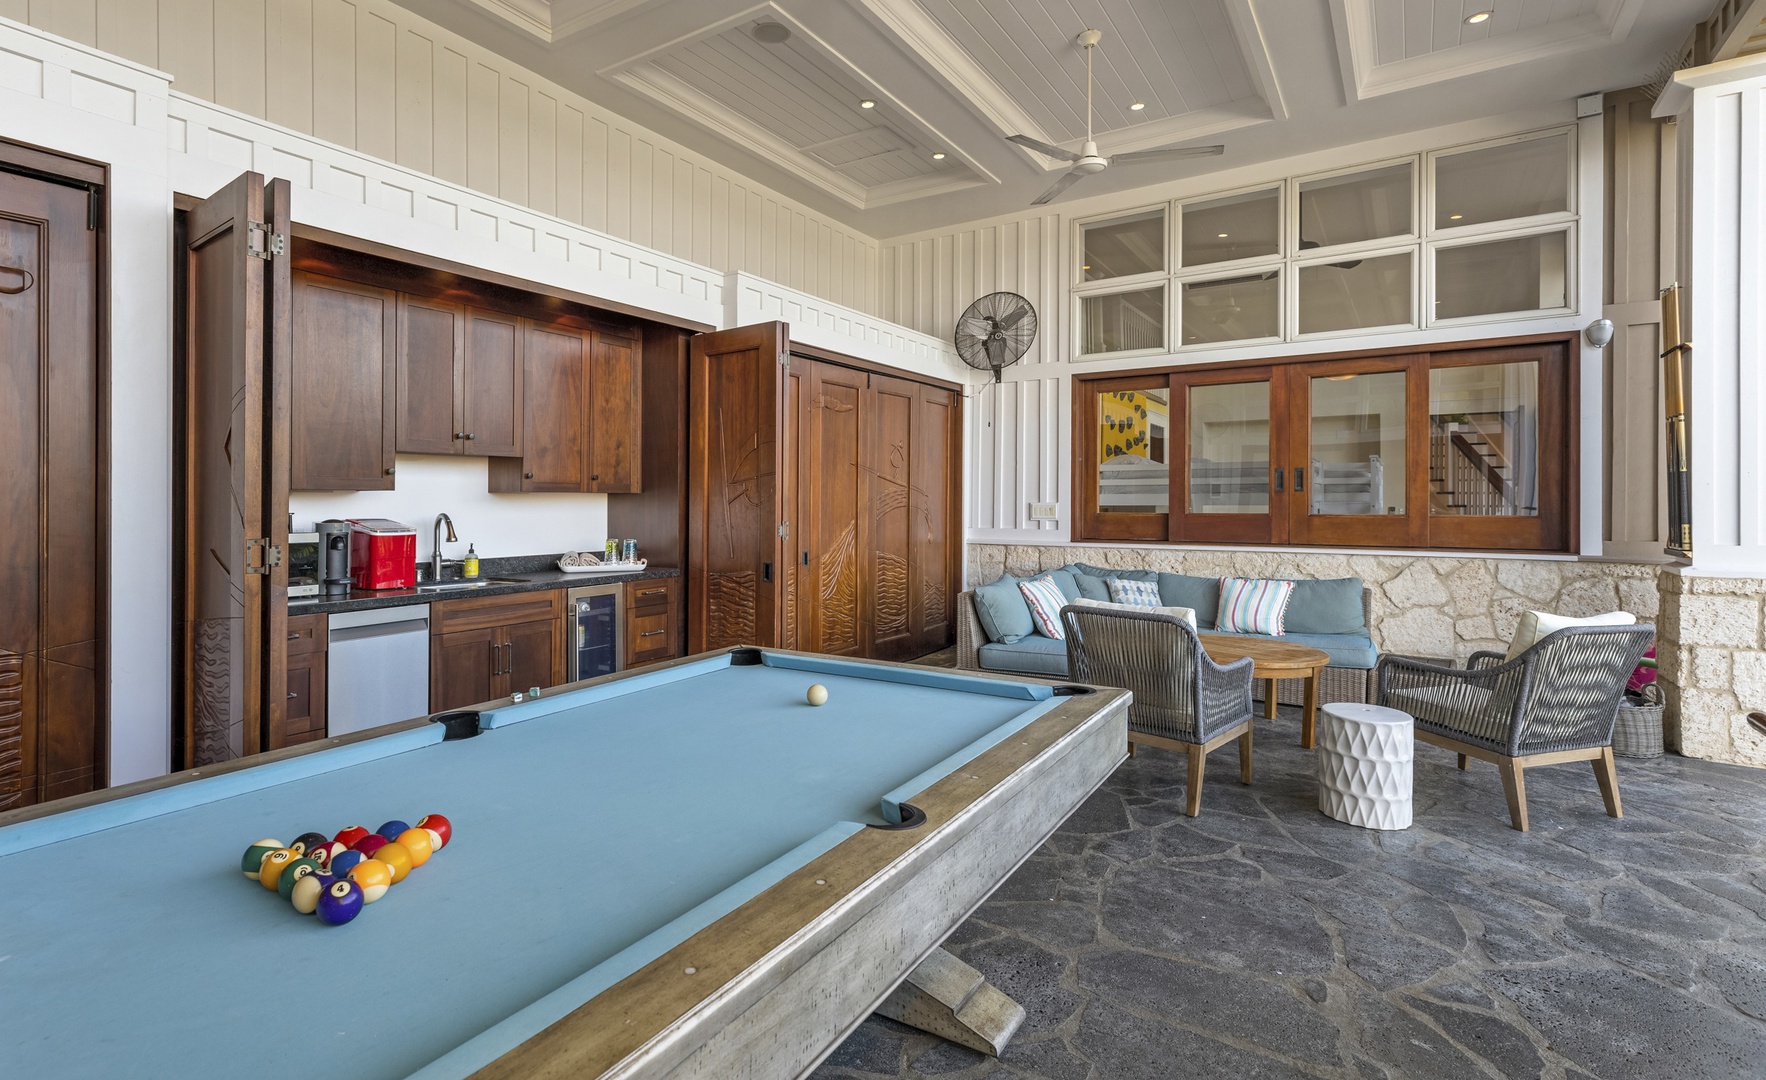 Kailua Vacation Rentals, Lanikai Villa - The pool table offers an opportunity for fun and competition!